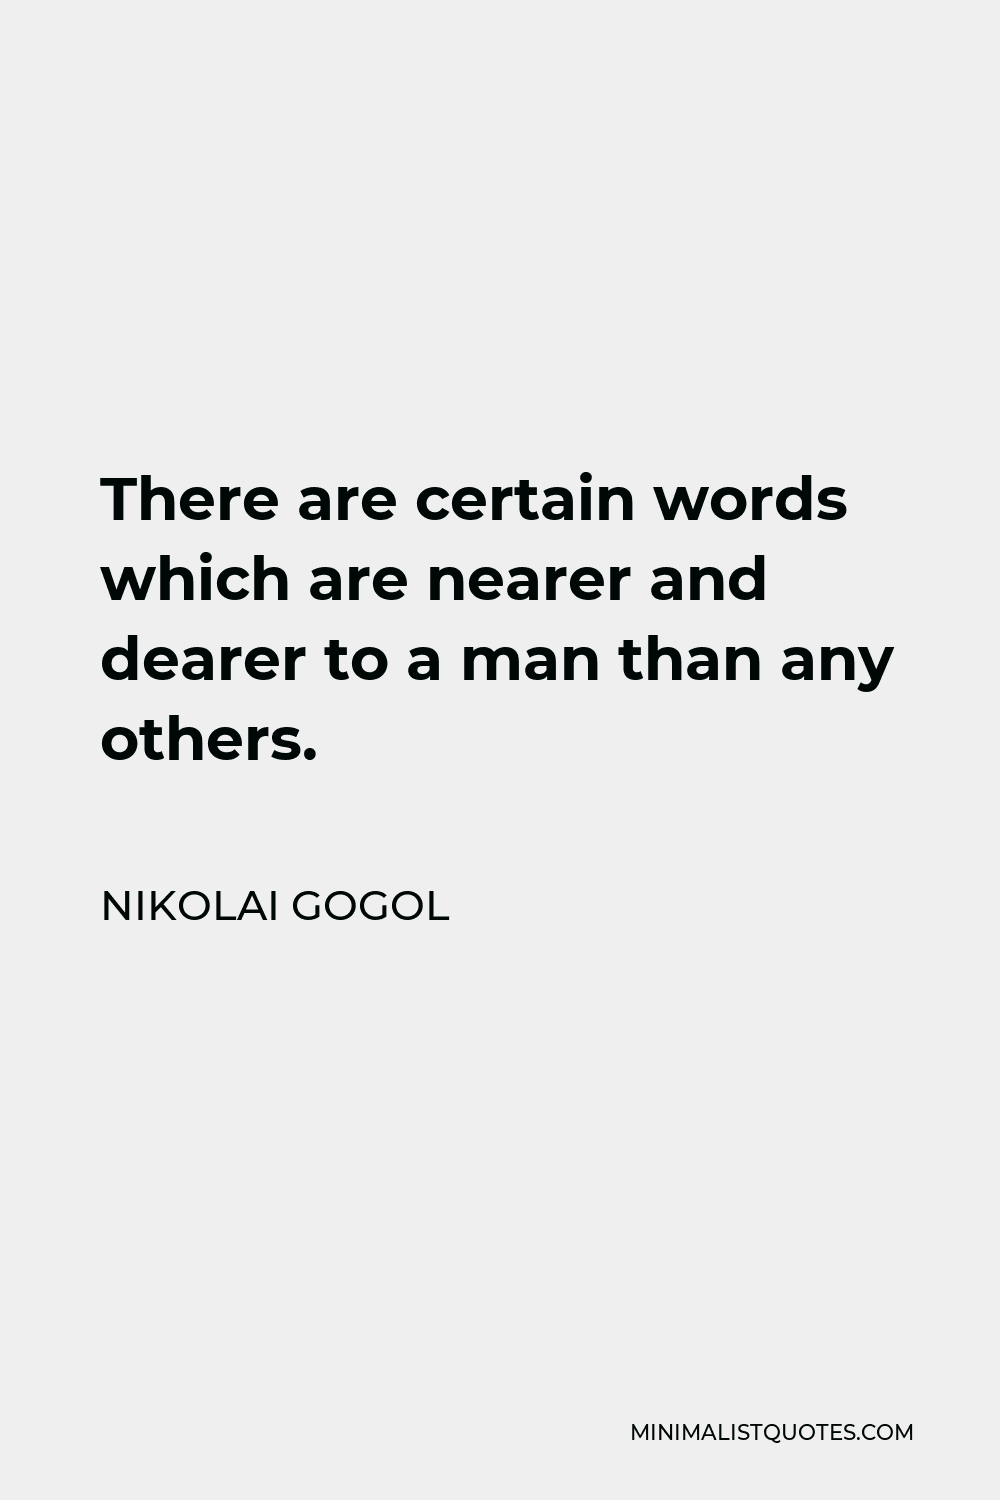 Nikolai Gogol Quote - There are certain words which are nearer and dearer to a man than any others.